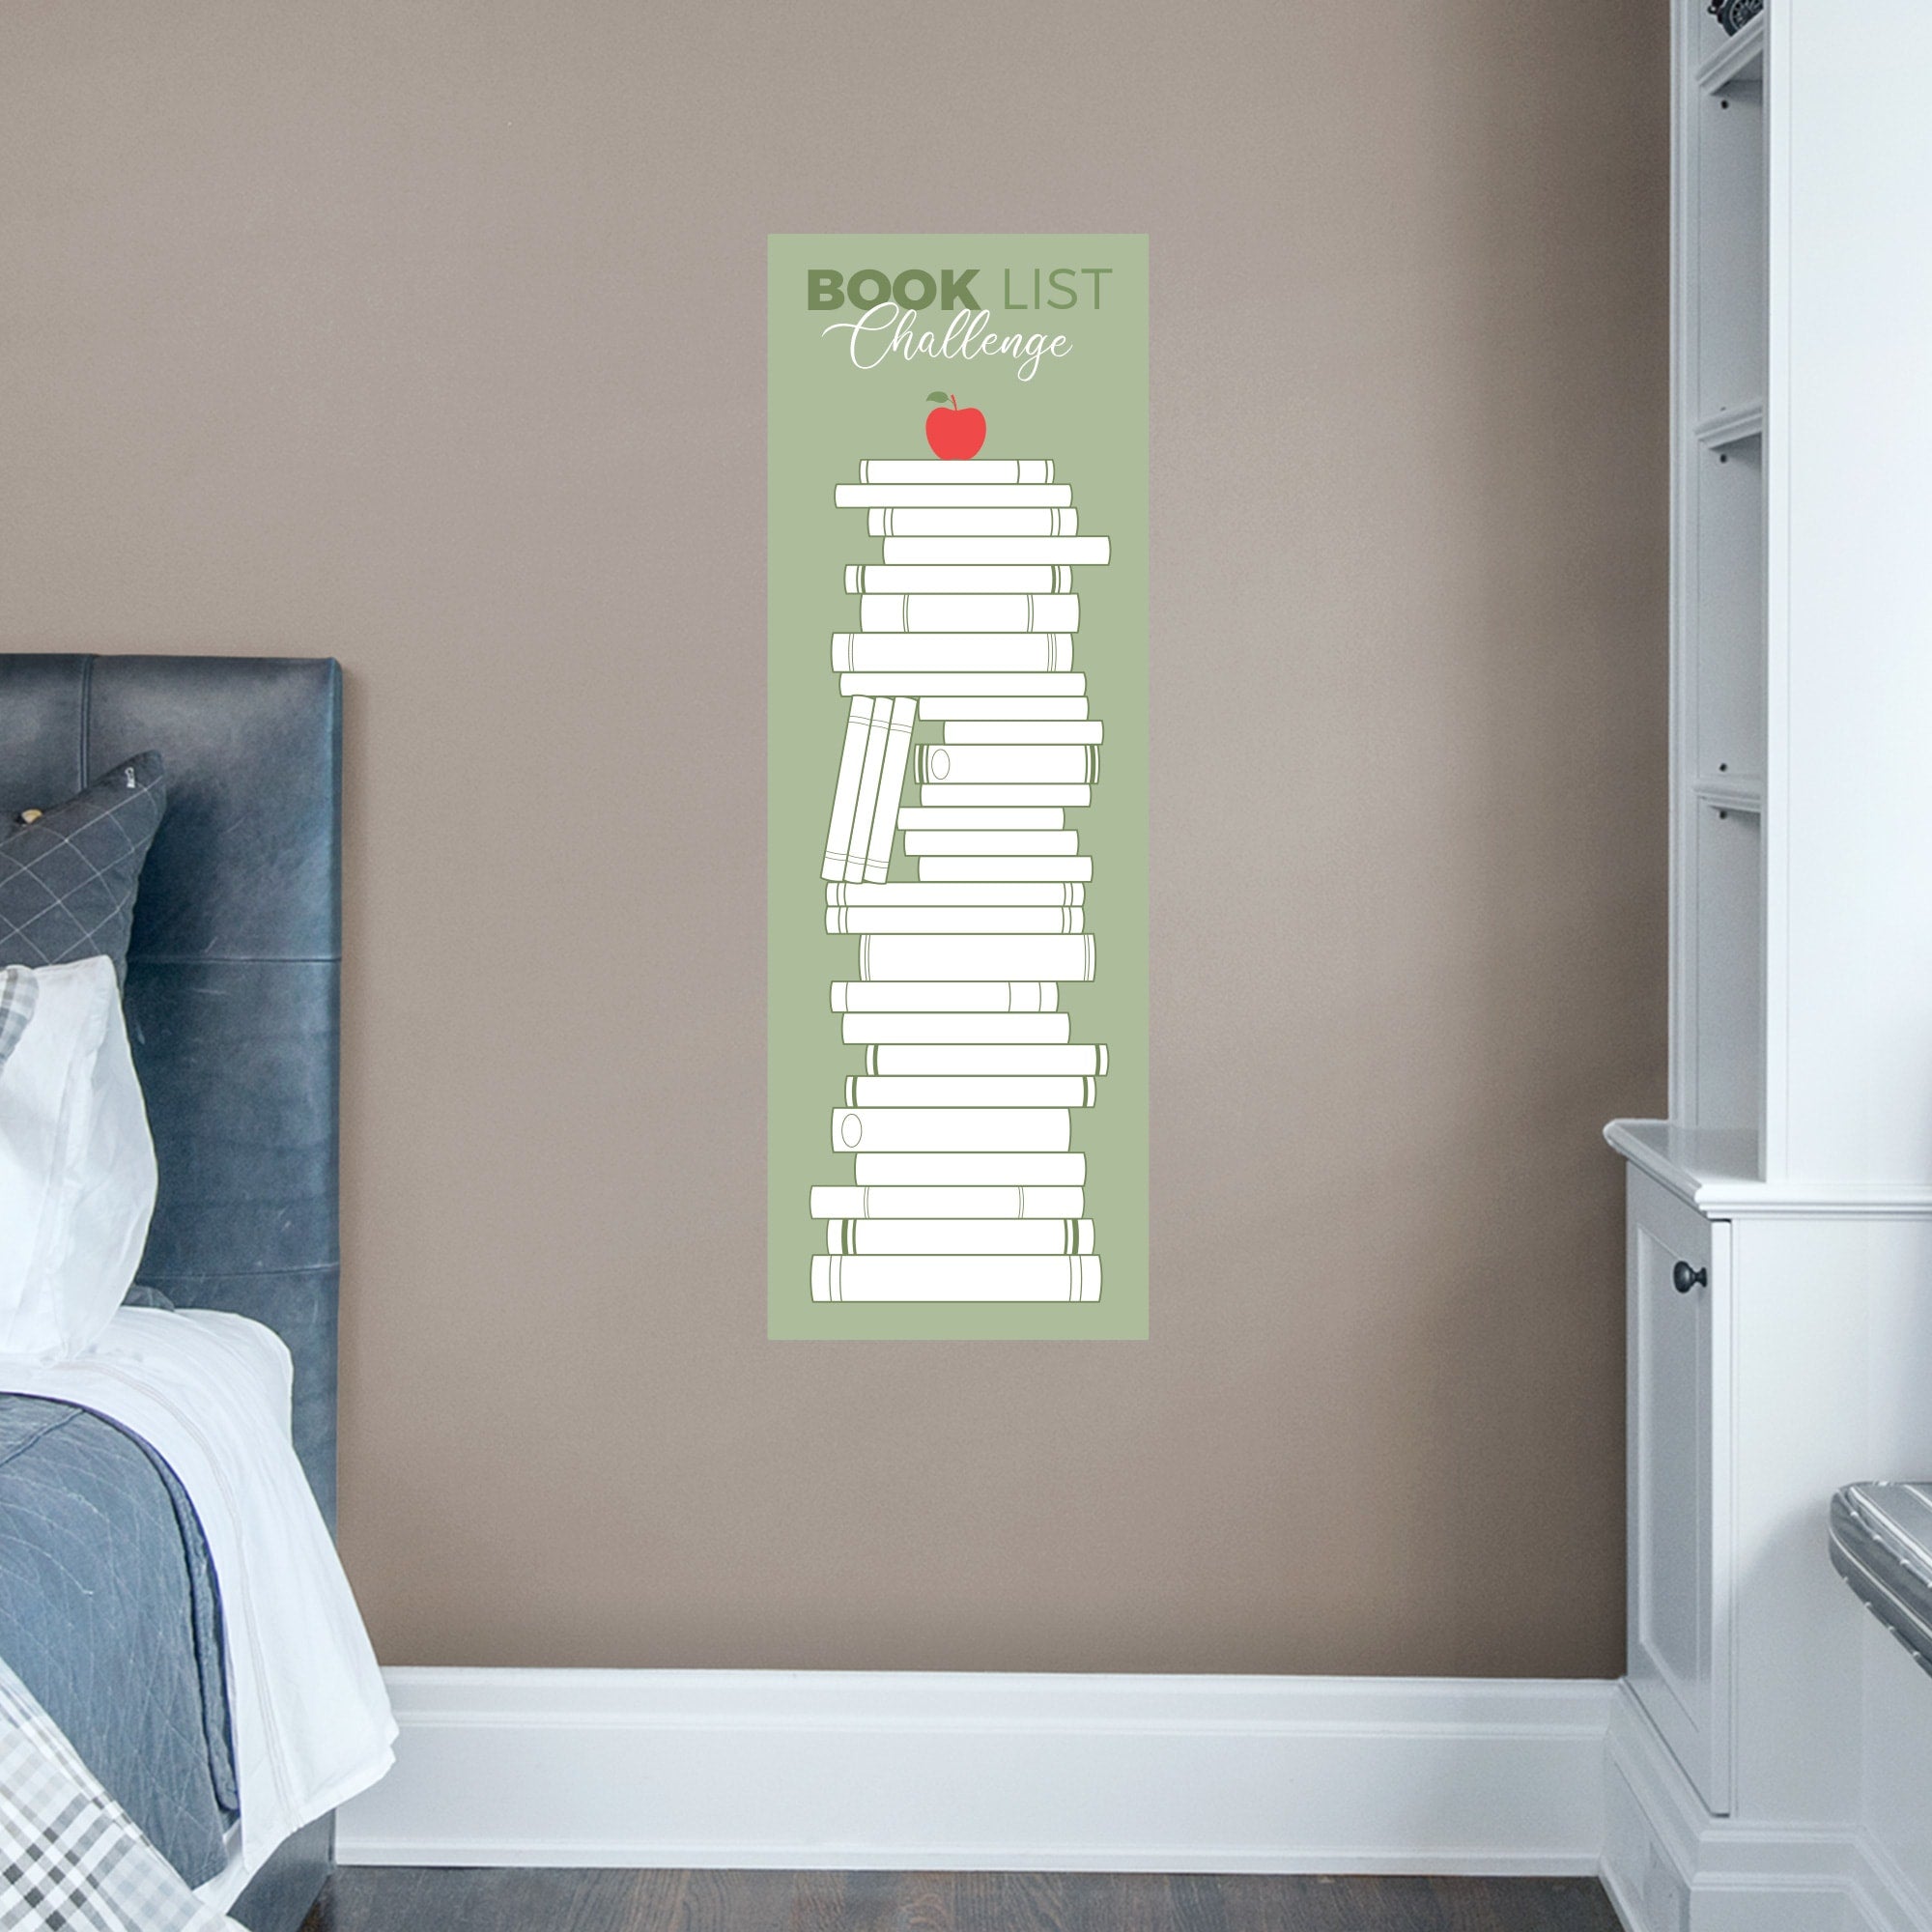 Book List Challenge - Removable Dry Erase Vinyl Decal in Green (52"W x 40"H) by Fathead